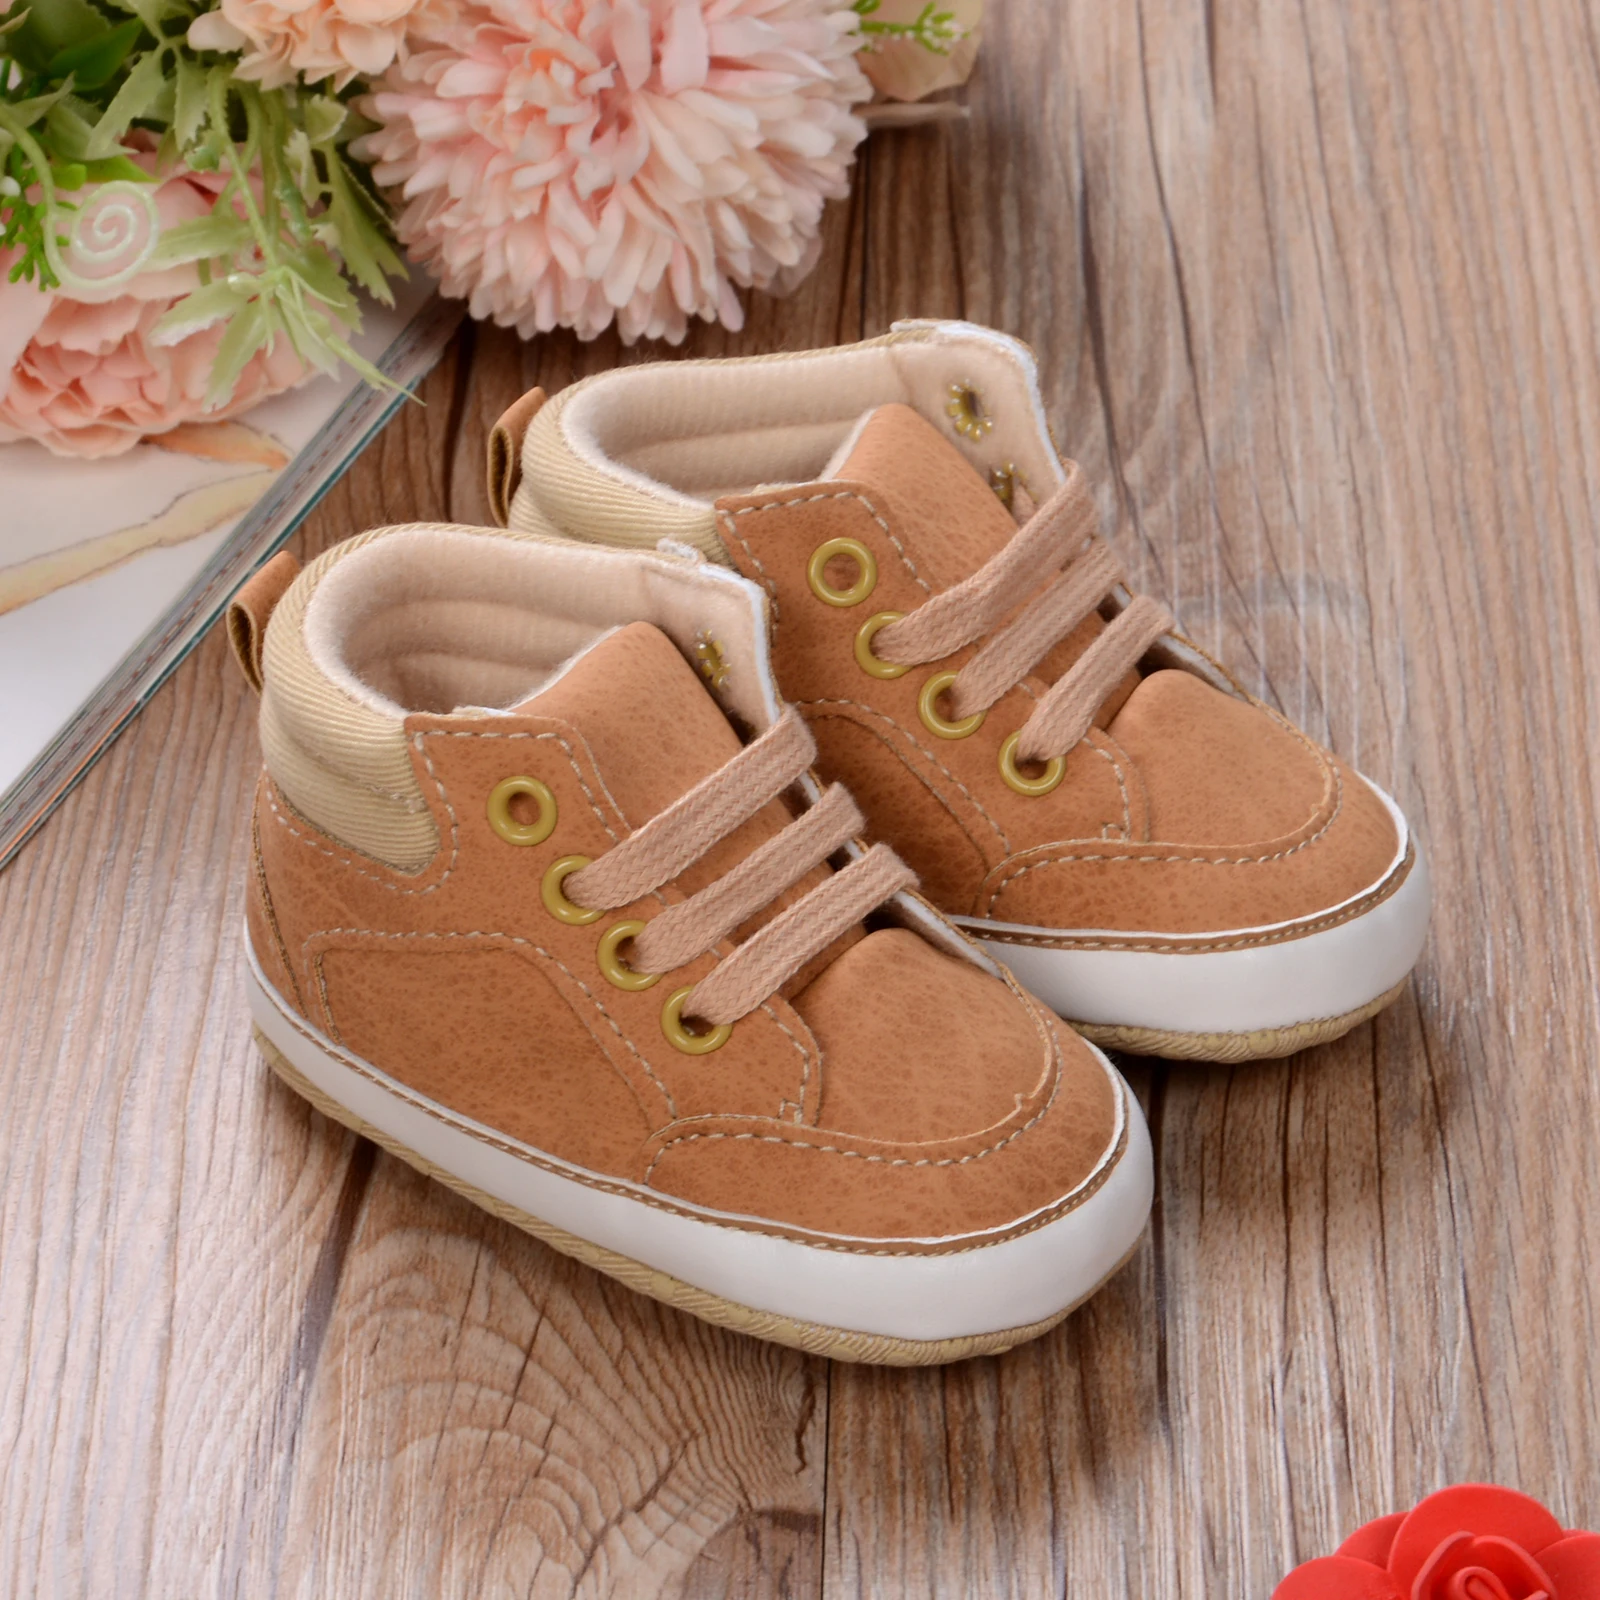 When Should Your Baby Wear Shoes for Newborns?